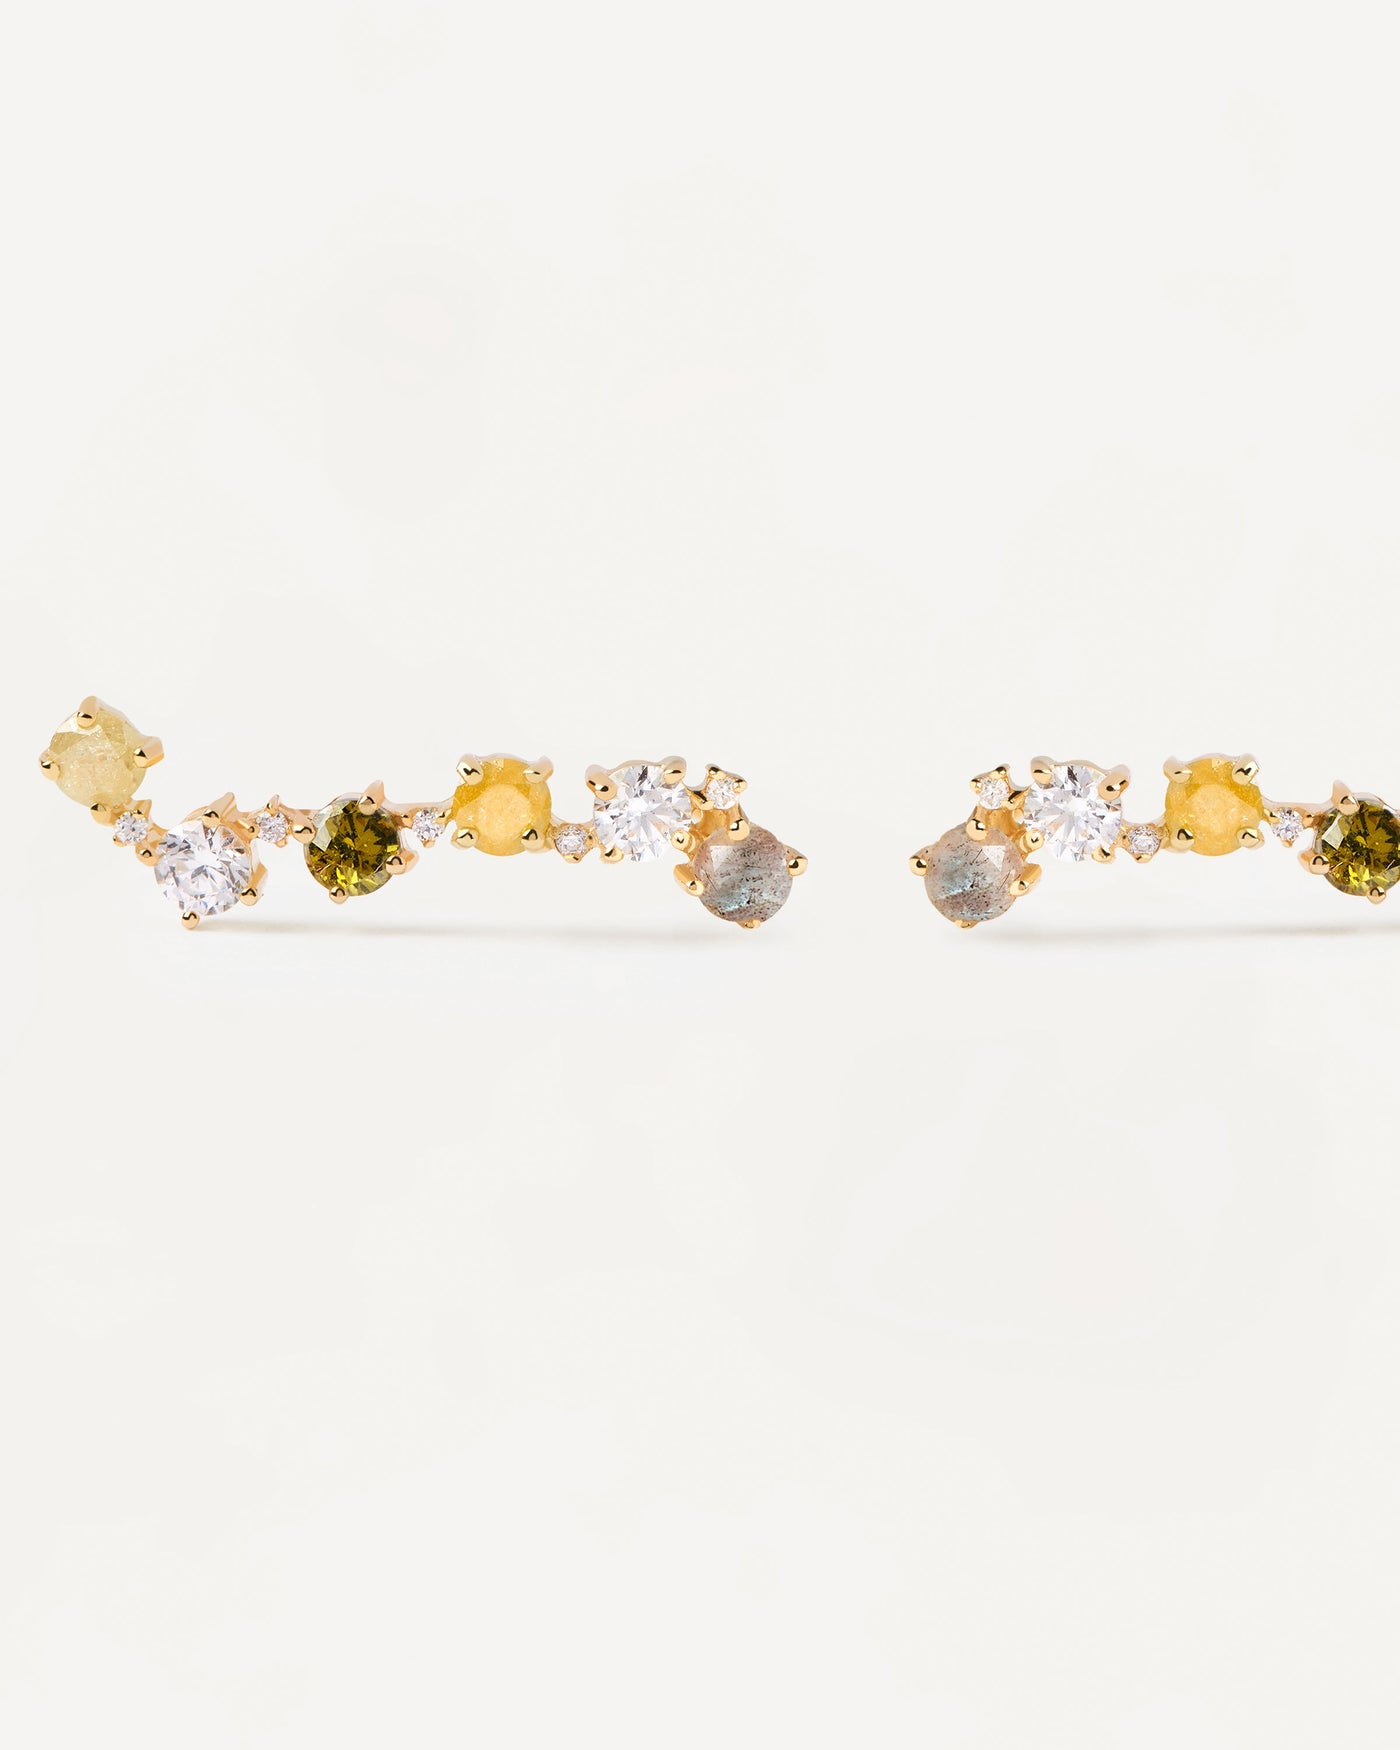 2023 Selection | April Earrings. Climbing earrings with yellow gemstones. Get the latest arrival from PDPAOLA. Place your order safely and get this Best Seller. Free Shipping.